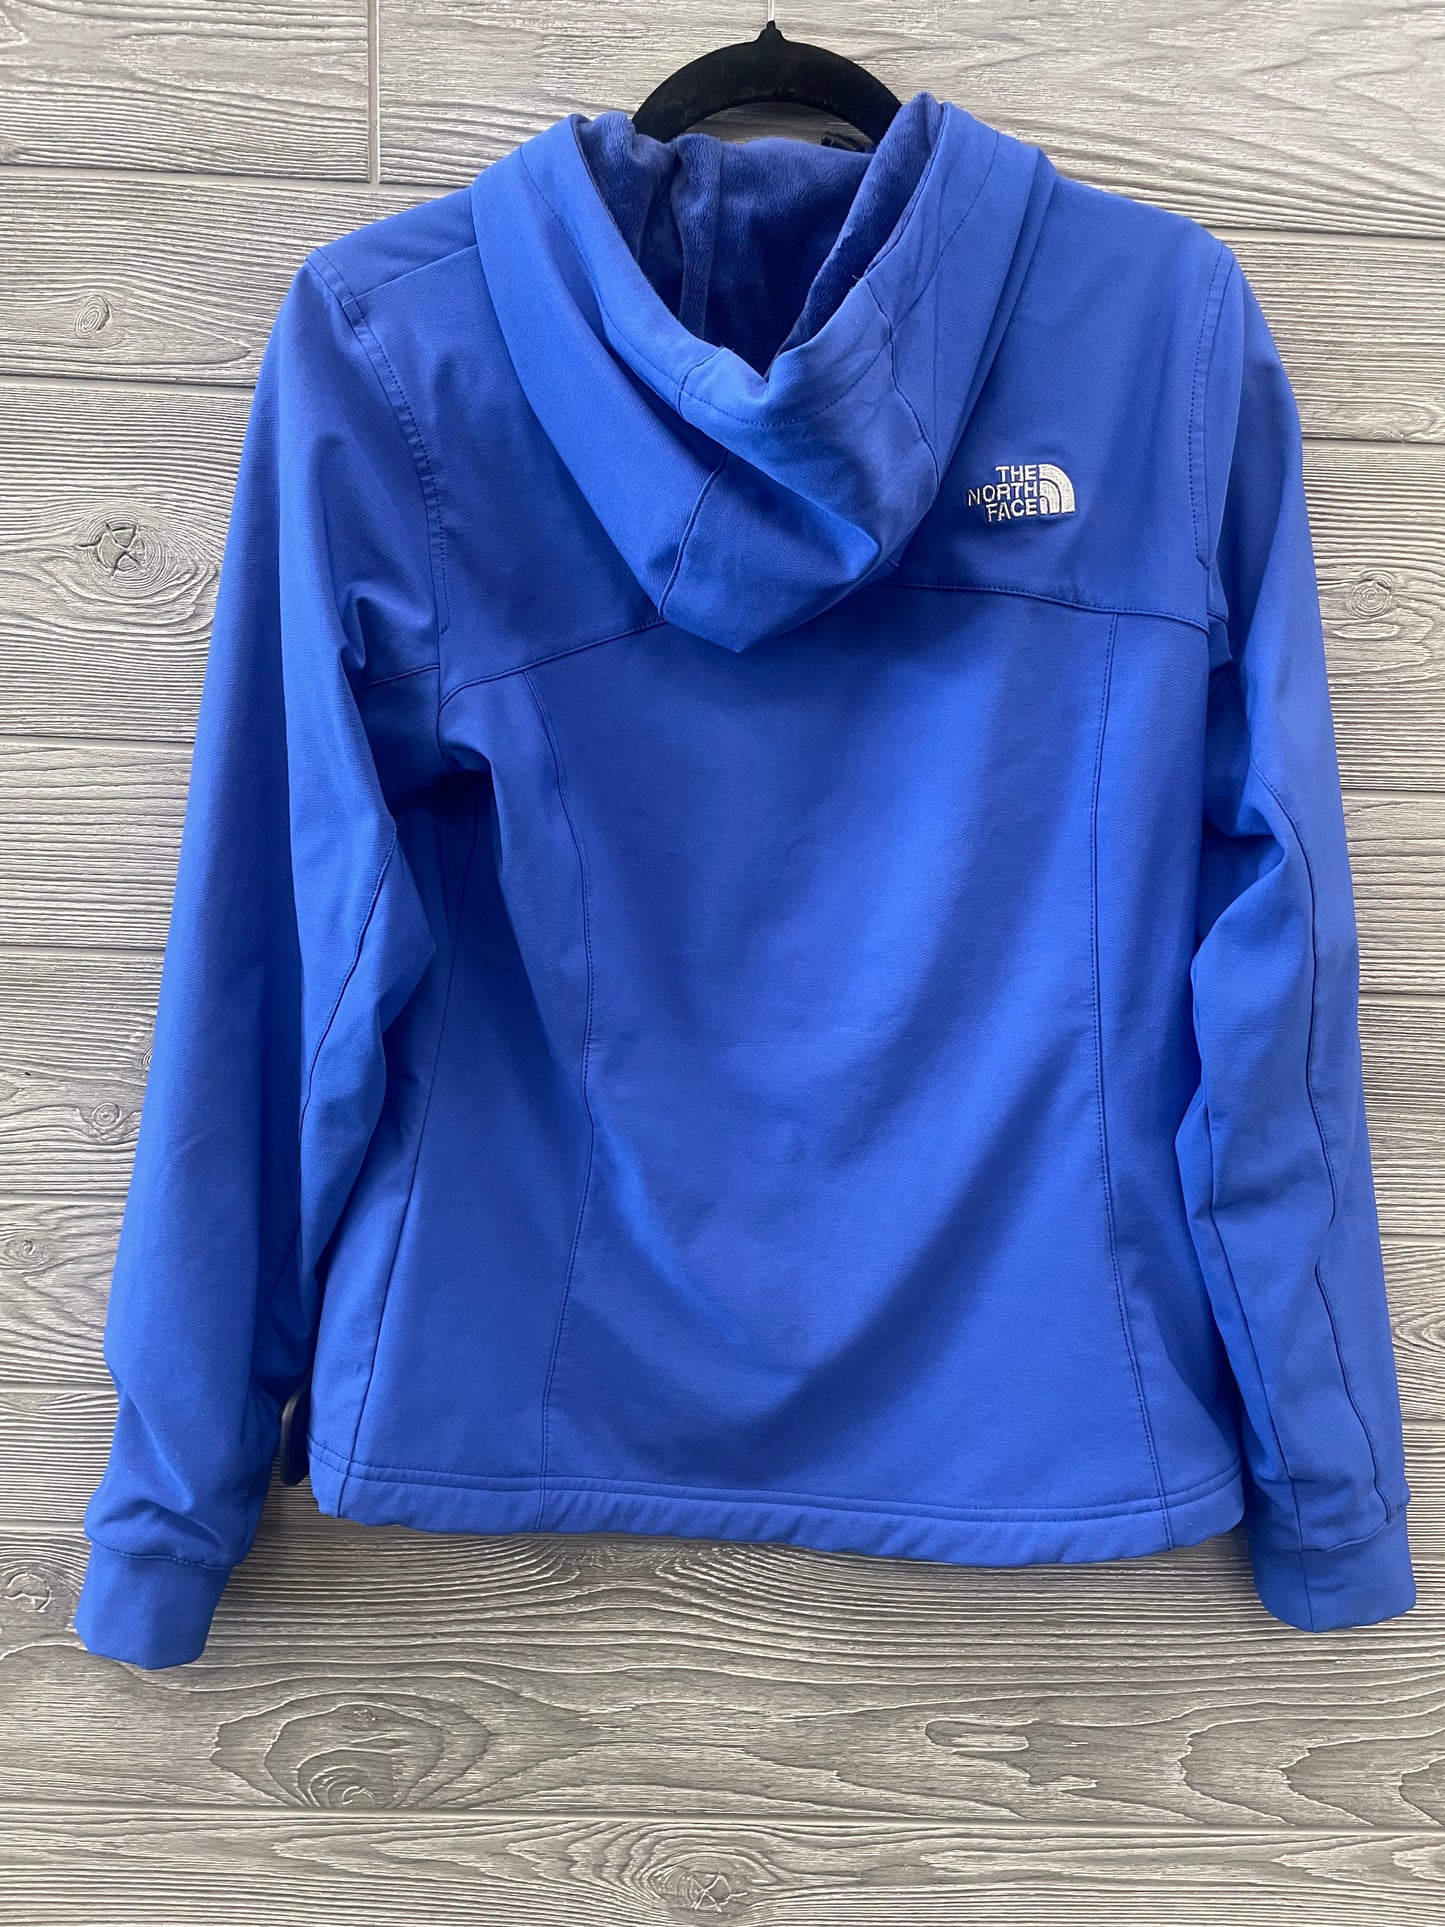 Jacket Other By The North Face  Size: S